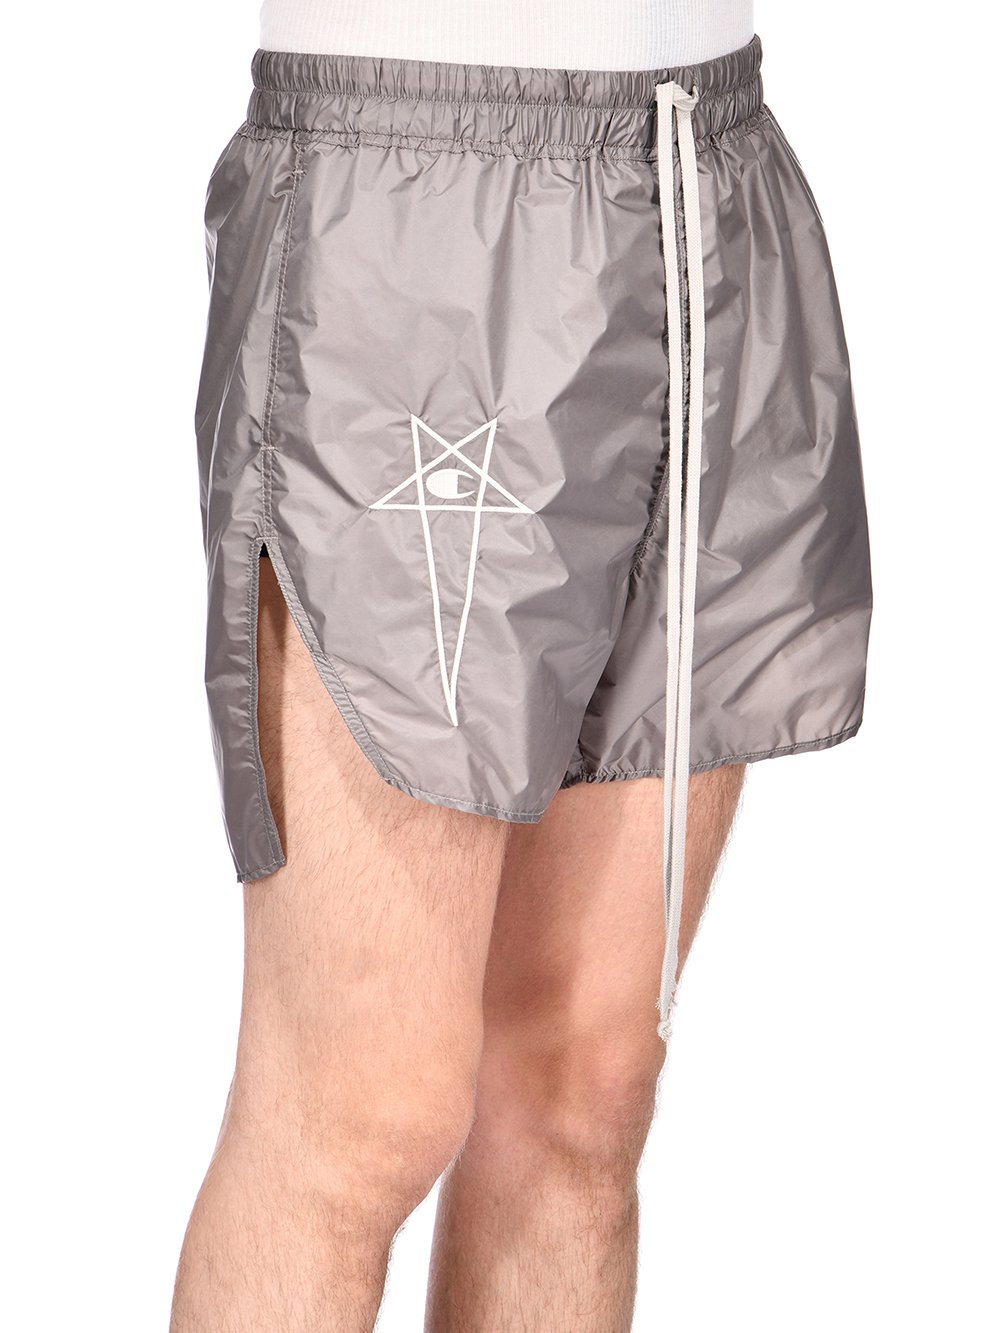 CHAMPION X RICK OWENS DOLPHIN BOXERS IN DUST GREY RECYCLED NYLON